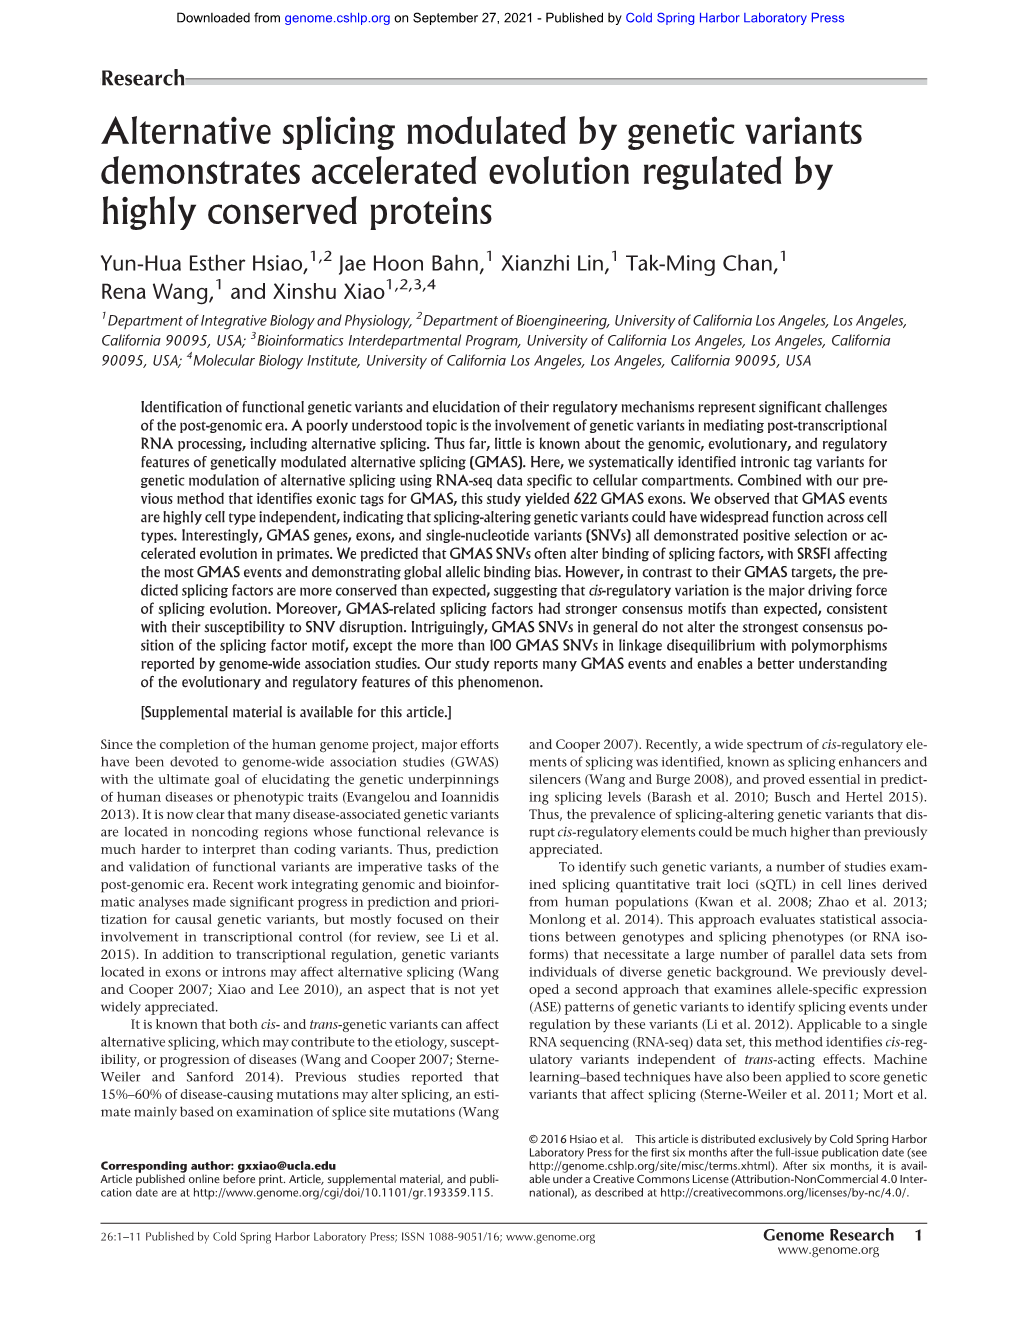 Alternative Splicing Modulated by Genetic Variants Demonstrates Accelerated Evolution Regulated by Highly Conserved Proteins